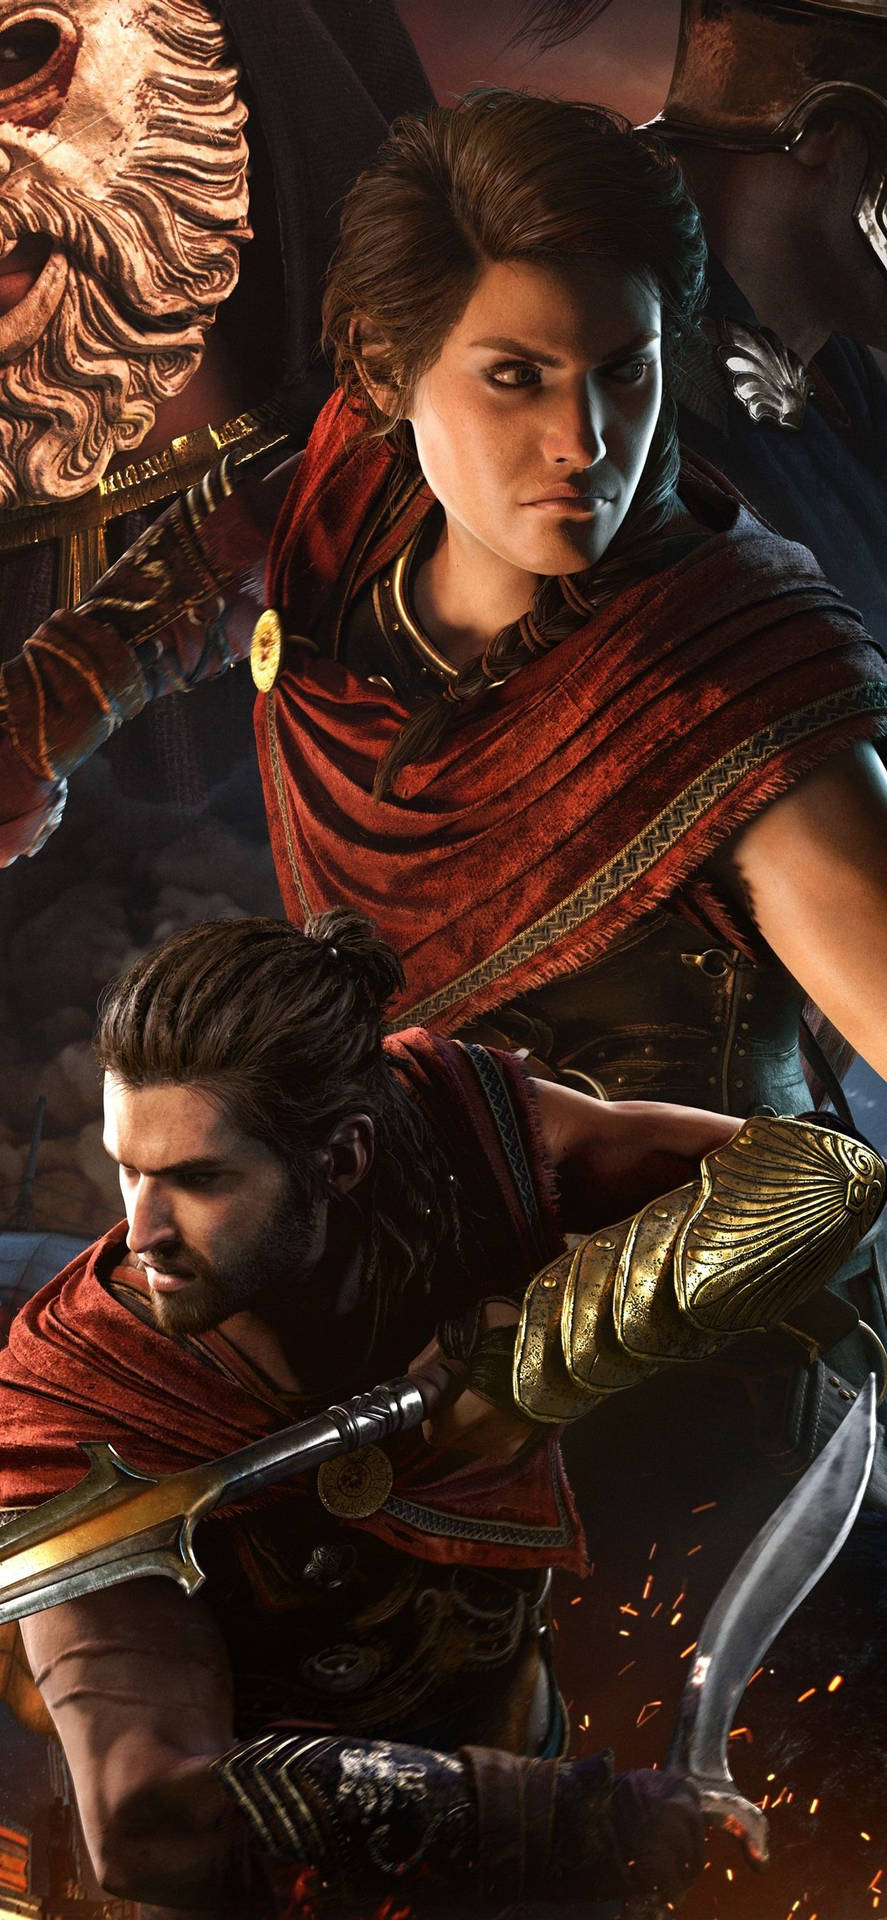 Kassandra And Alexios Of Assassin's Creed Odyssey Iphone